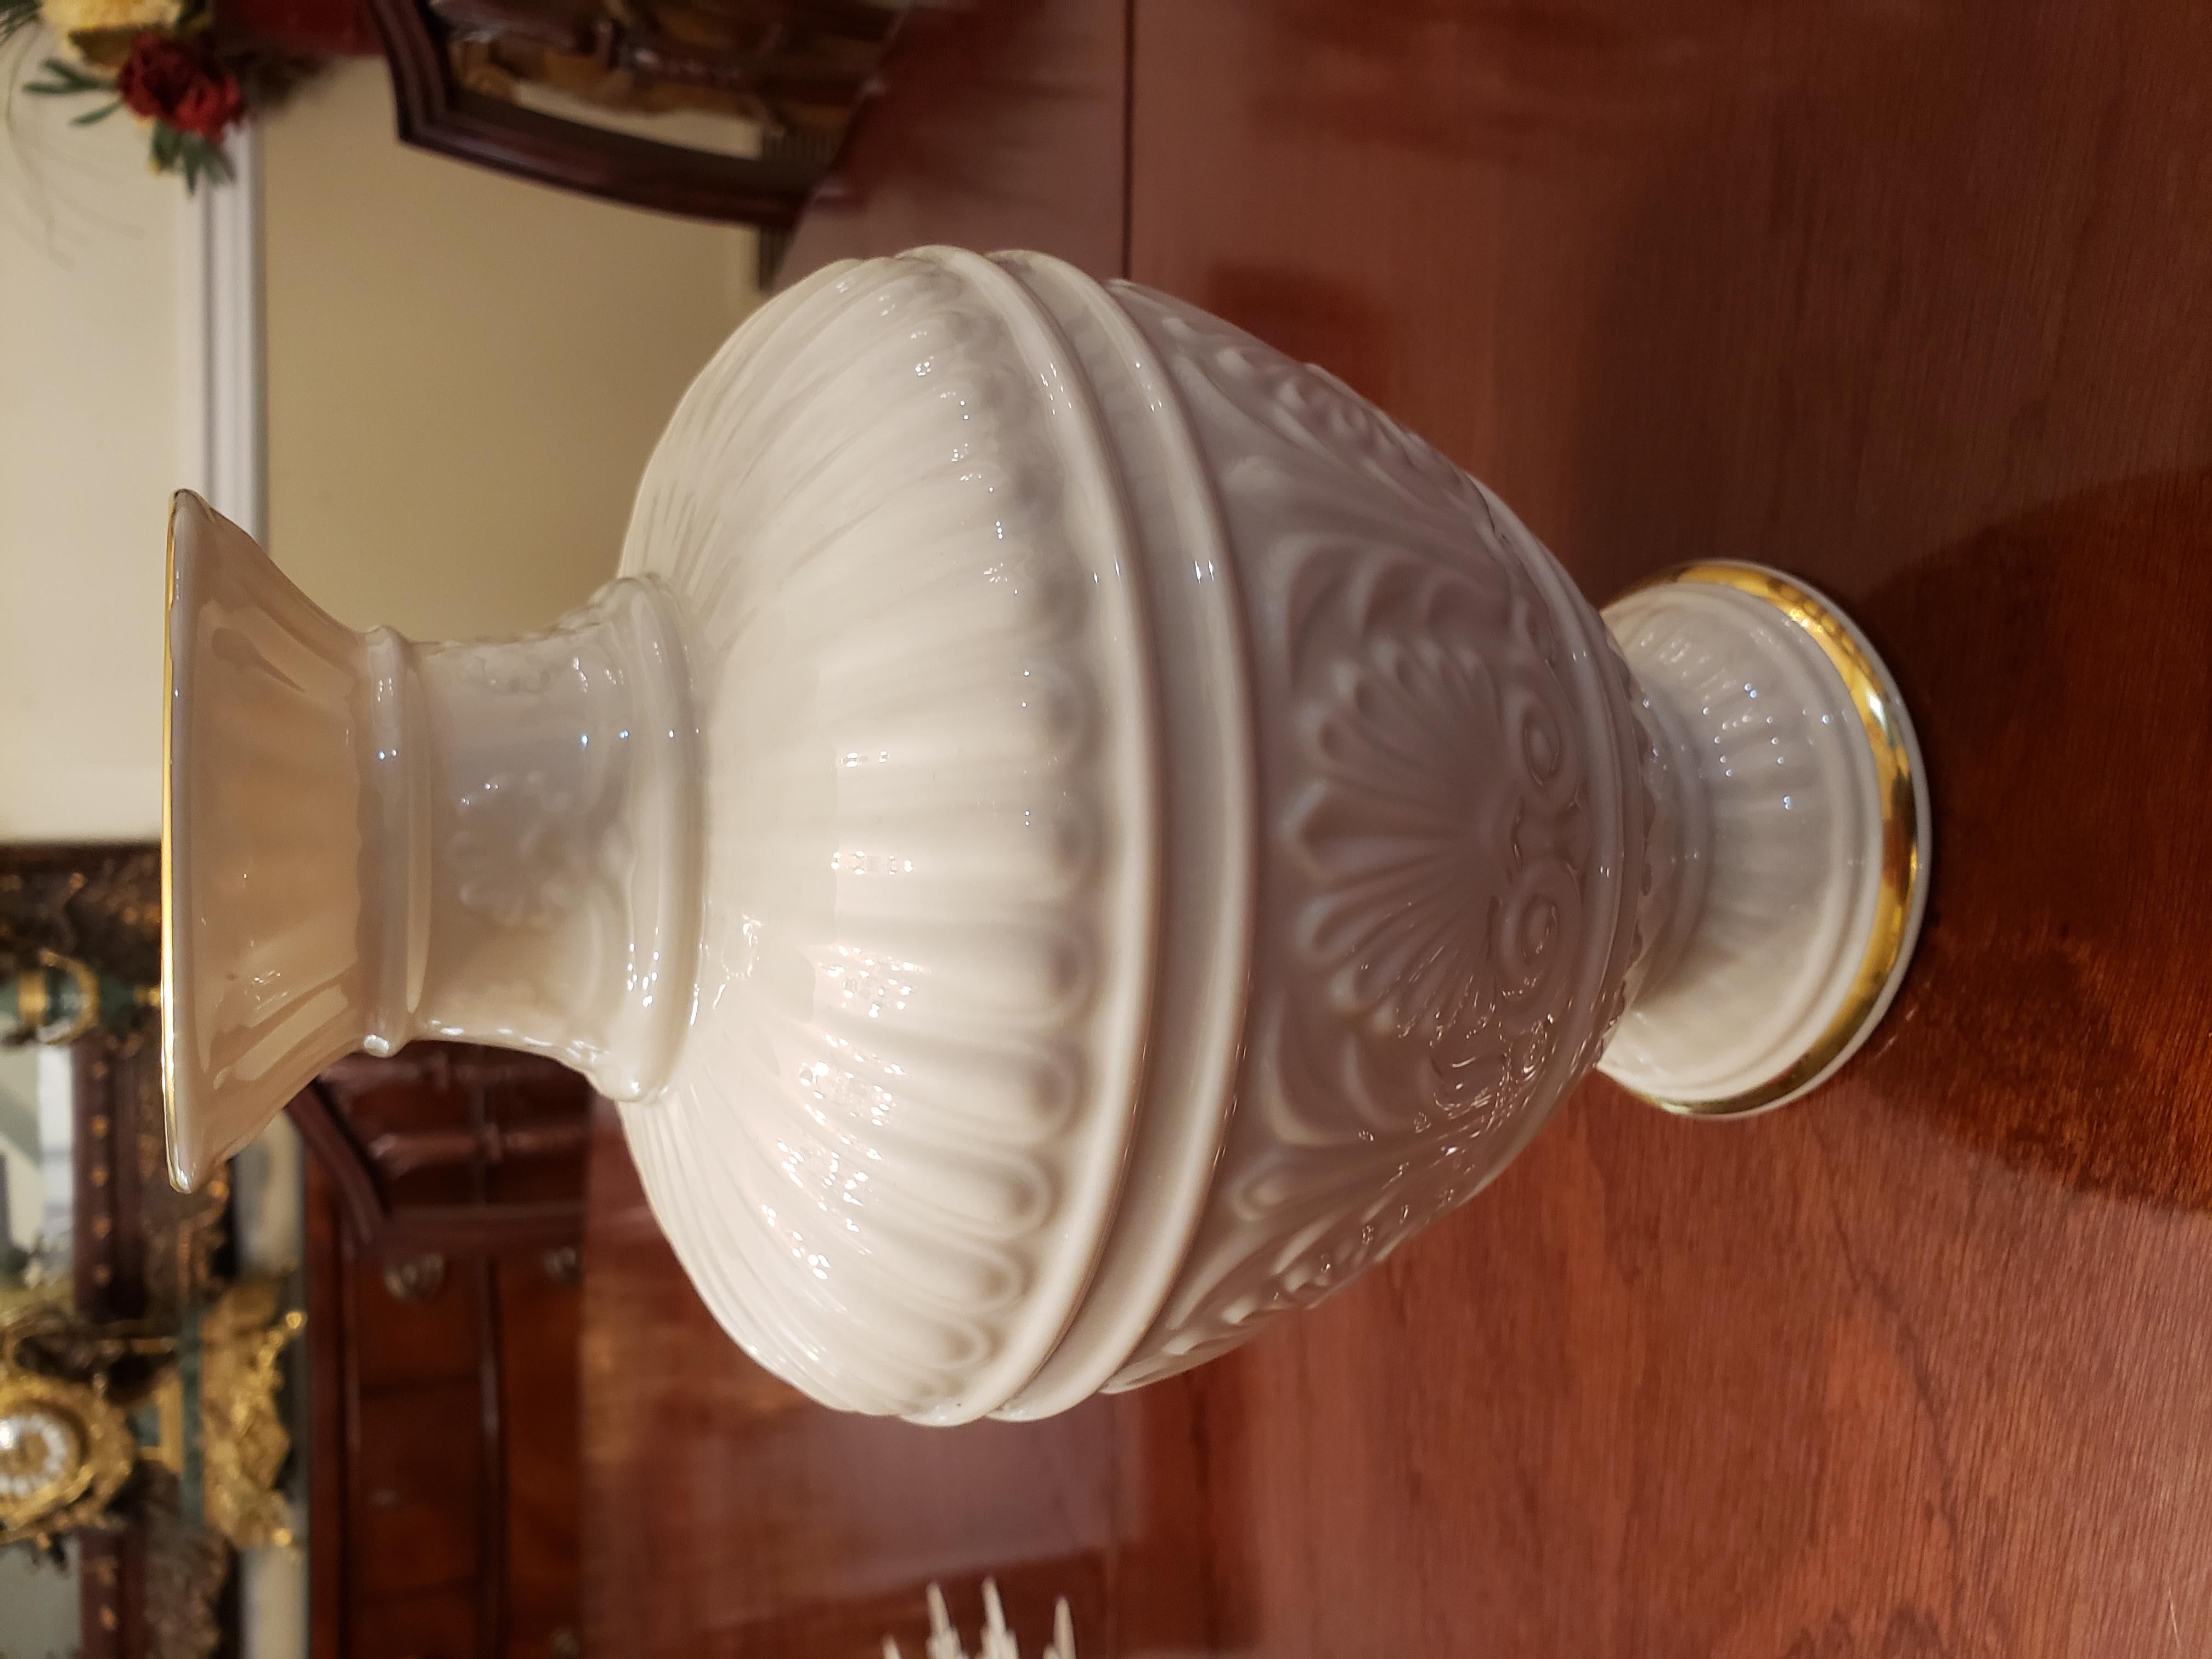 This is a very nice Lenox China vase in the Athenian pattern. Also made in U.S.A. so it is Vintage Lenox. This vase measures 9 1/2 inches high, 3 3/4 at the base and 6 inches at the widest depth 3.25